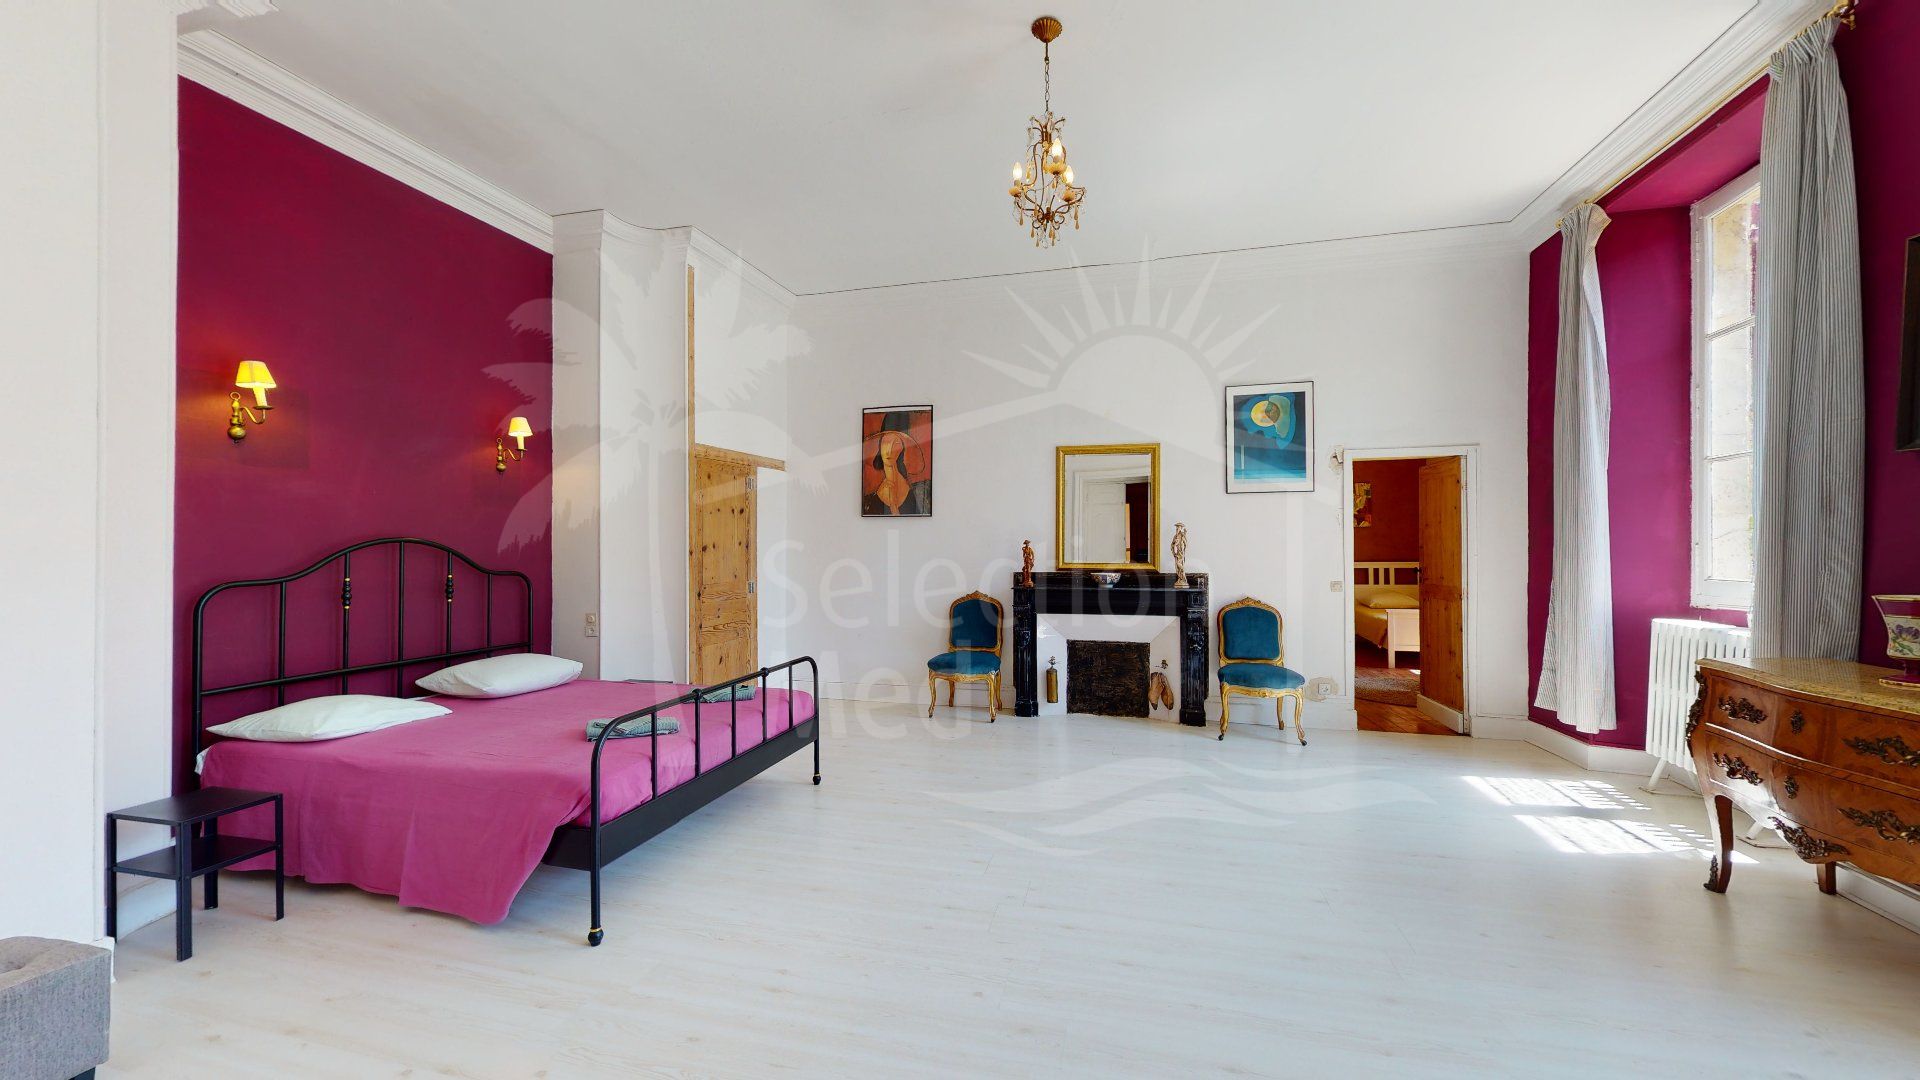 Authentique 20th century chateau with breath-taking views of the Pyrenees.